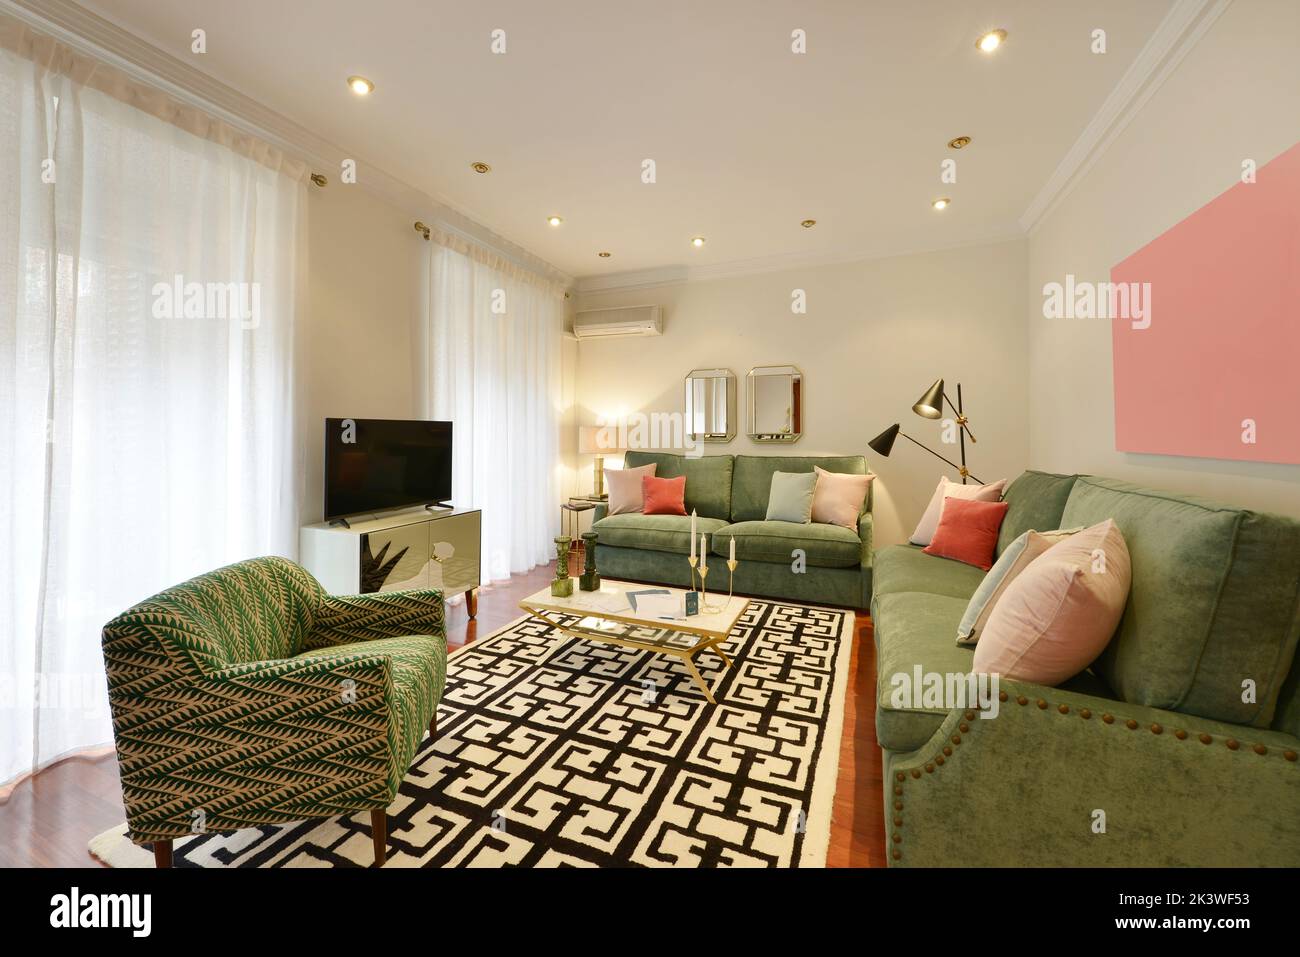 Living room of a house with one, two and three-seater sofas upholstered in green fabric with a wooden sideboard with a TV and balconies with curtains Stock Photo